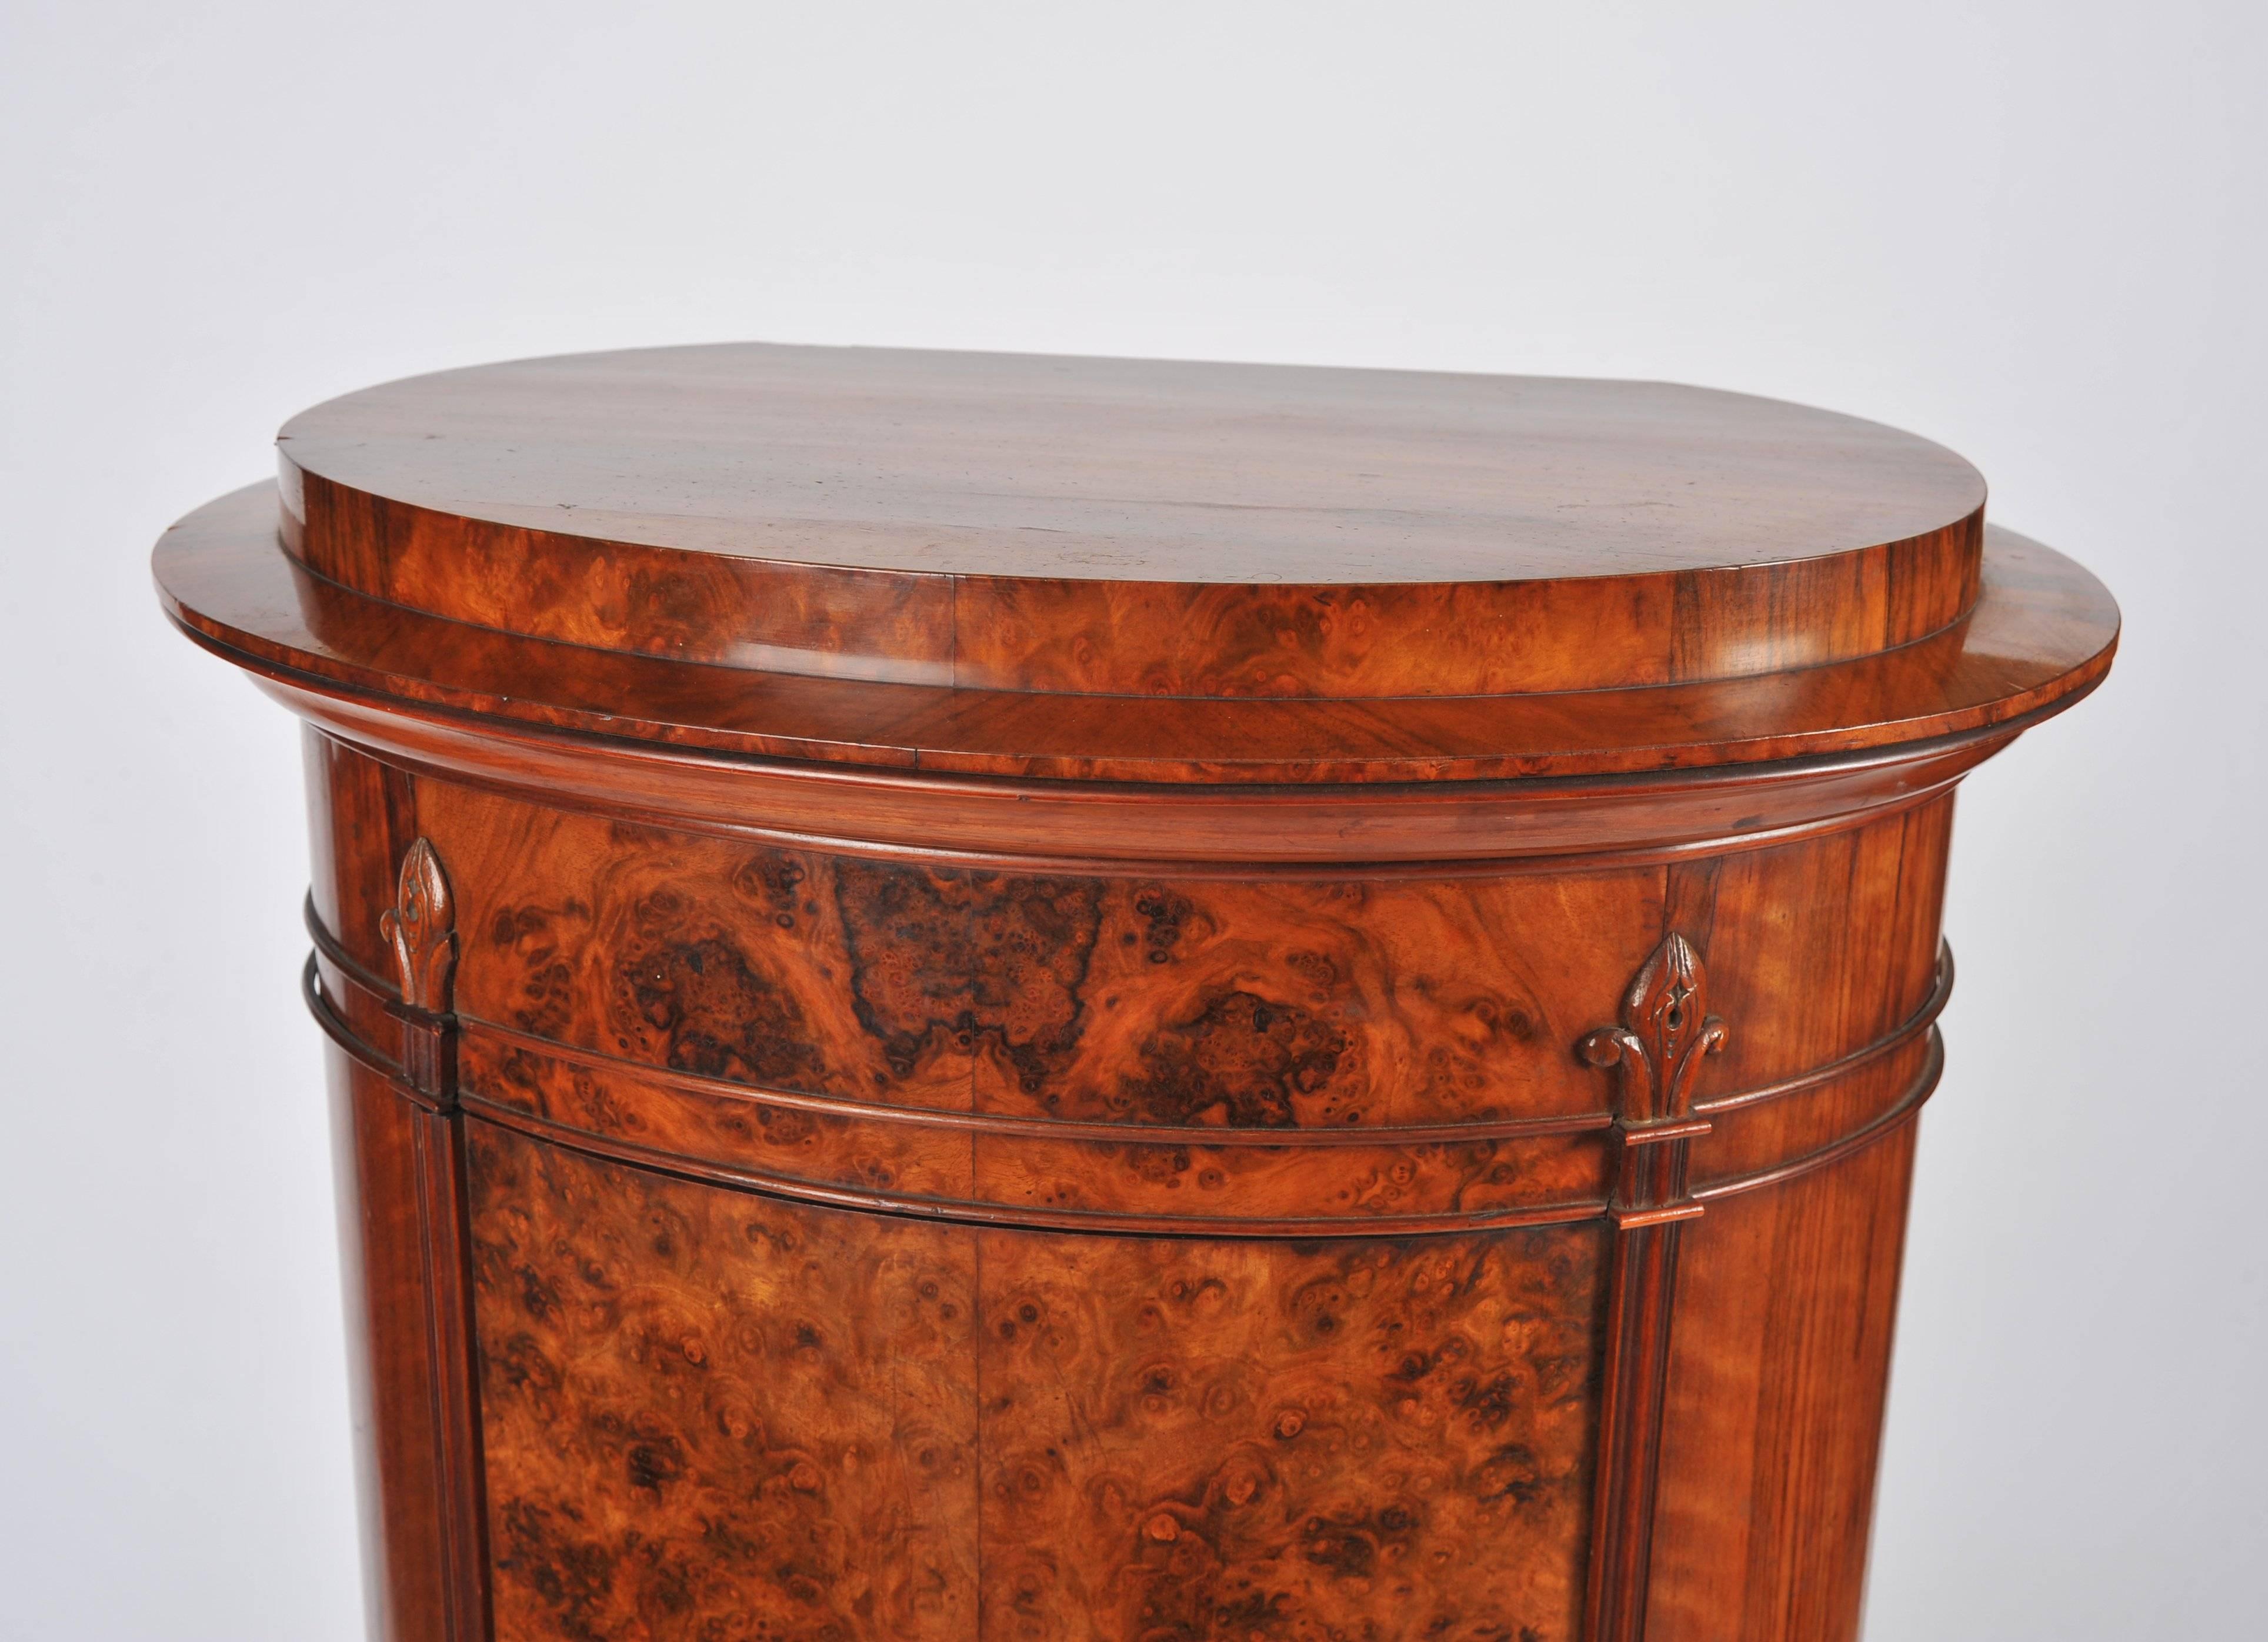 This marvellous and very appealing Victorian walnut pedestal cabinet features a more unusual oval shape and a burr walnut front. The cabinet has a full length central door which opens to reveal three fixed shelves. It measures 24 in – 61 cm wide, 15